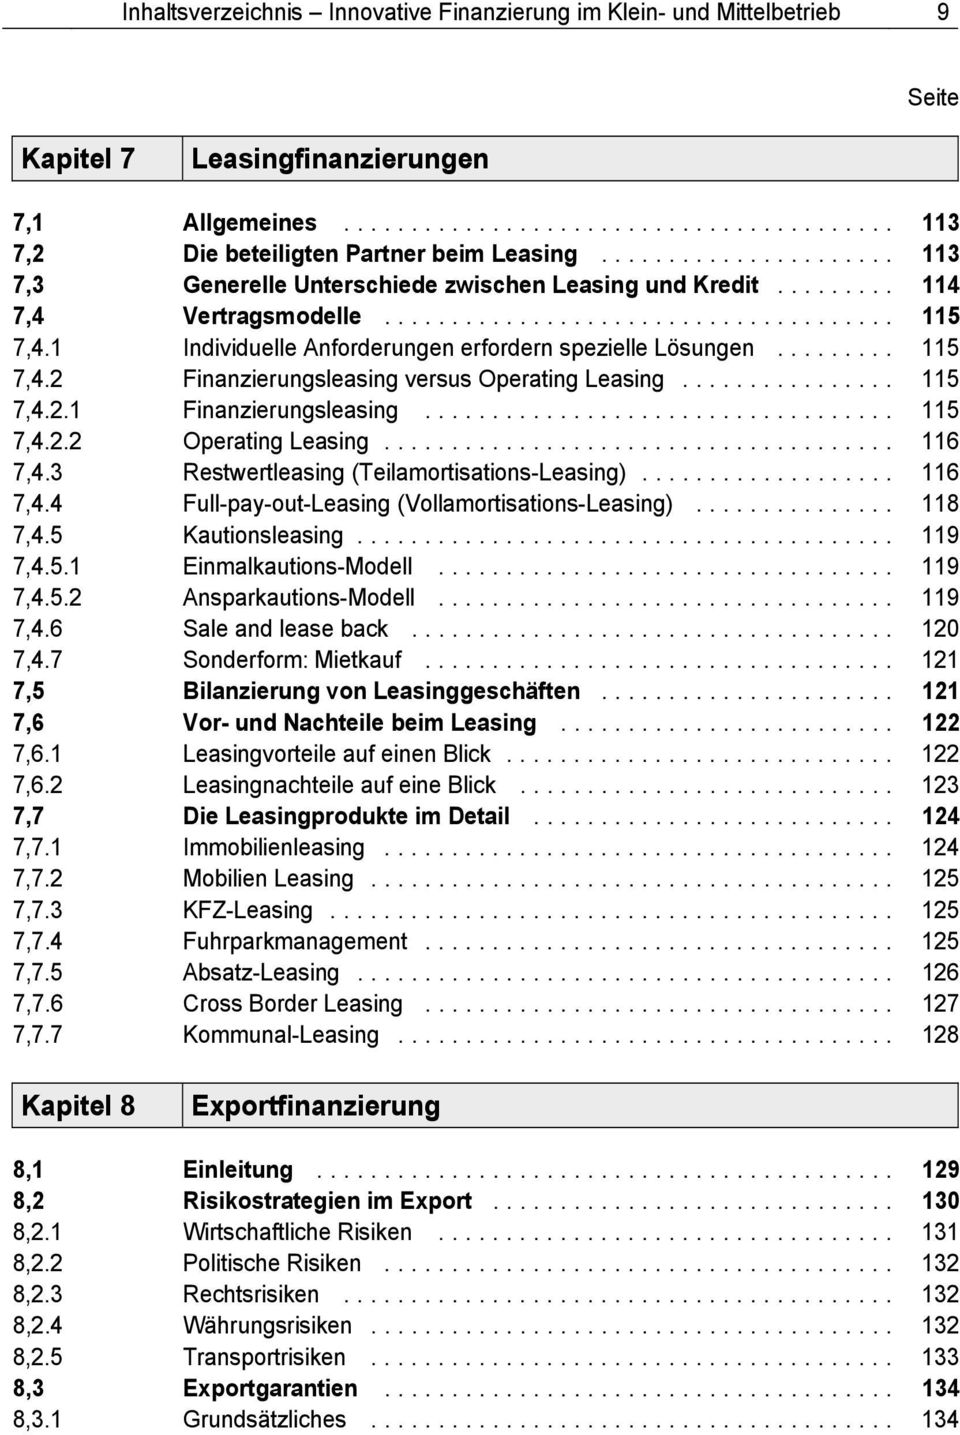 .. 115 7,4.2.1 Finanzierungsleasing... 115 7,4.2.2 Operating Leasing... 116 7,4.3 Restwertleasing (Teilamortisations-Leasing)... 116 7,4.4 Full-pay-out-Leasing (Vollamortisations-Leasing)... 118 7,4.